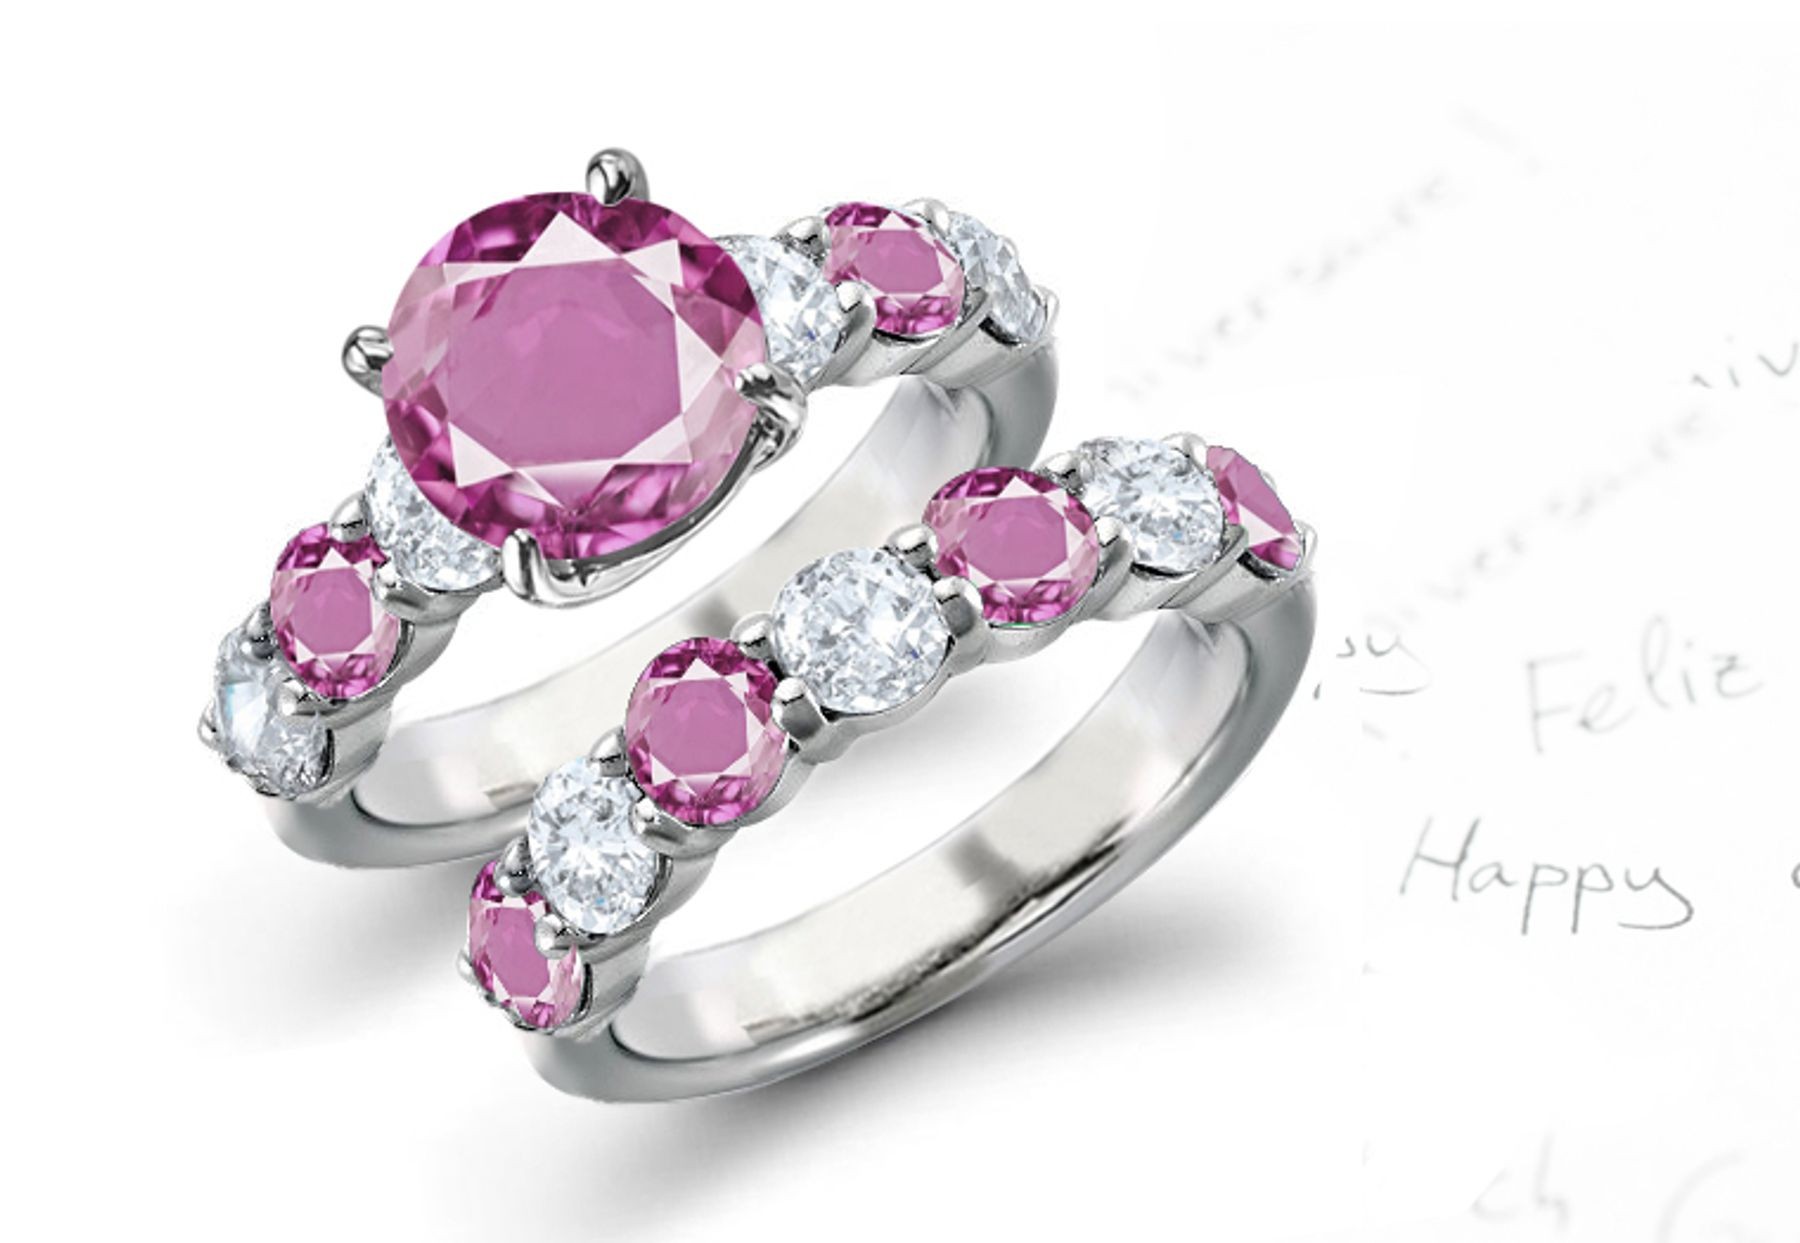 5 Stone Pink Sapphire Diamond Ring Collection for Engeament & Wedding